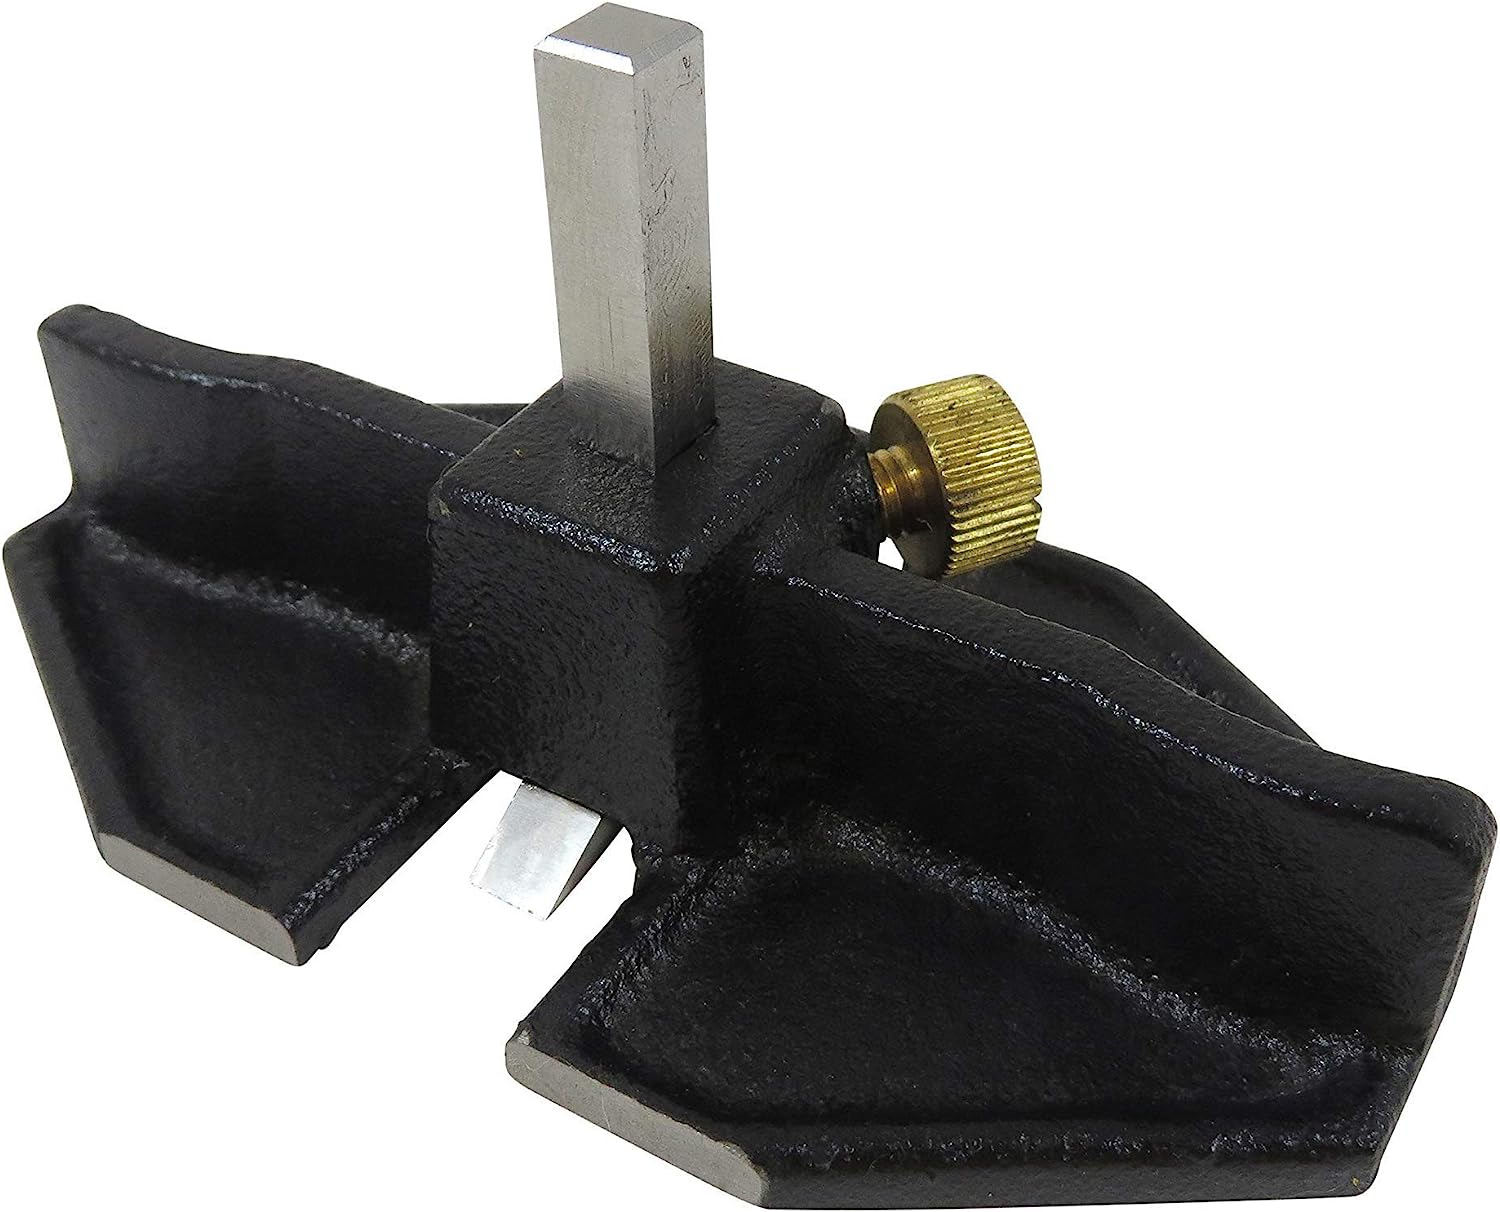 Taytools 468334 Small Router Plane 1/4 Inch Wide Blade, 4-1/8 X 1-1/4 Inch Base,